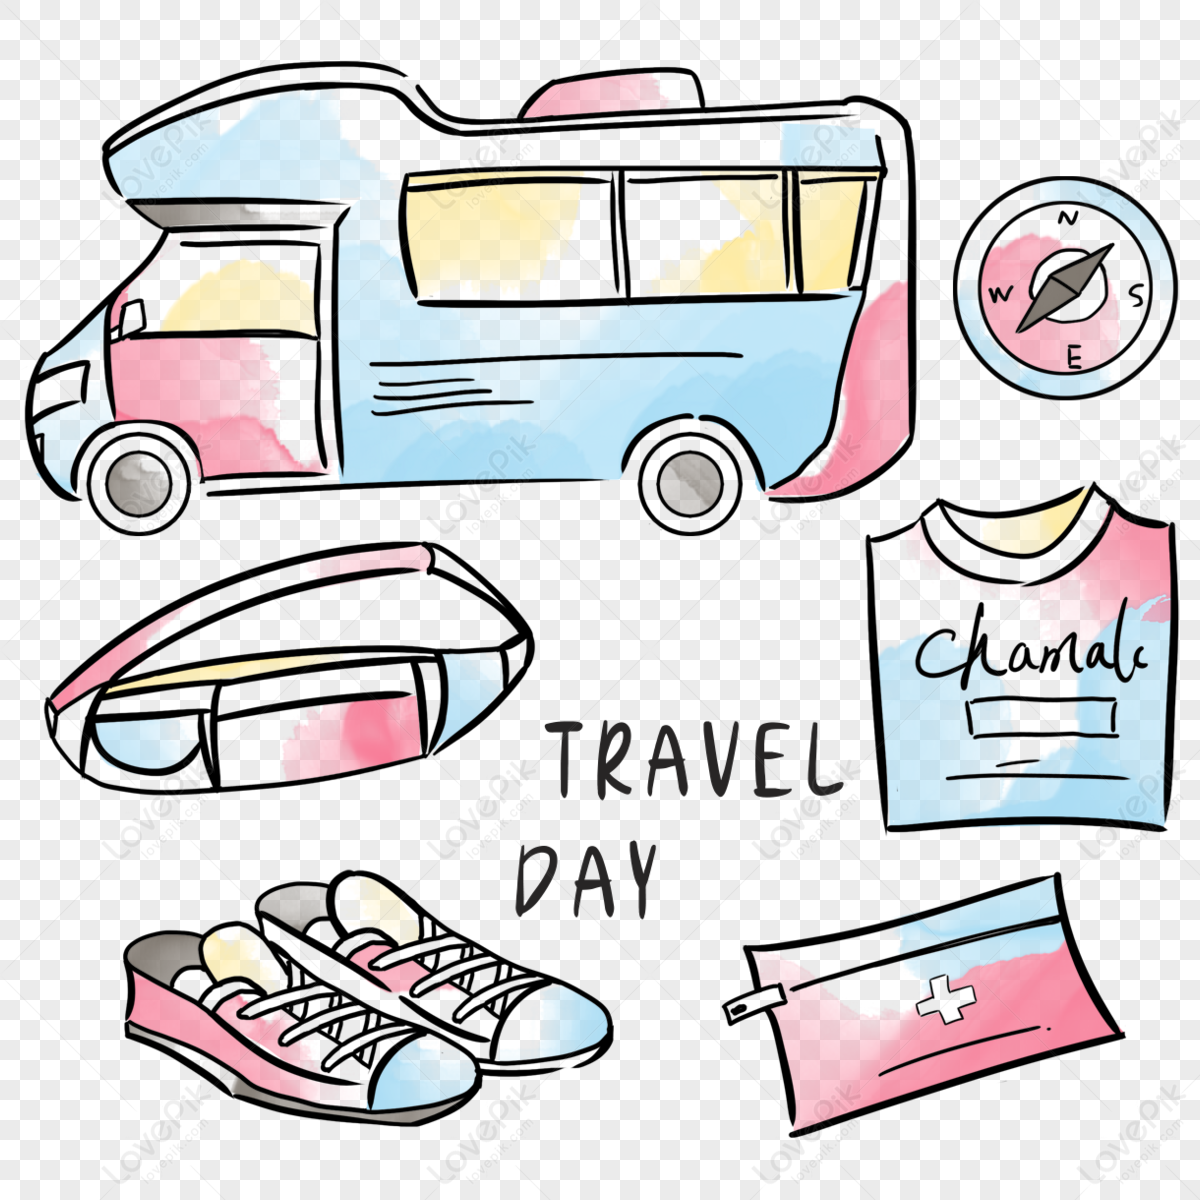 Travel watercolor canvas lamb house car bag,hand draw,first aid kit png image free download